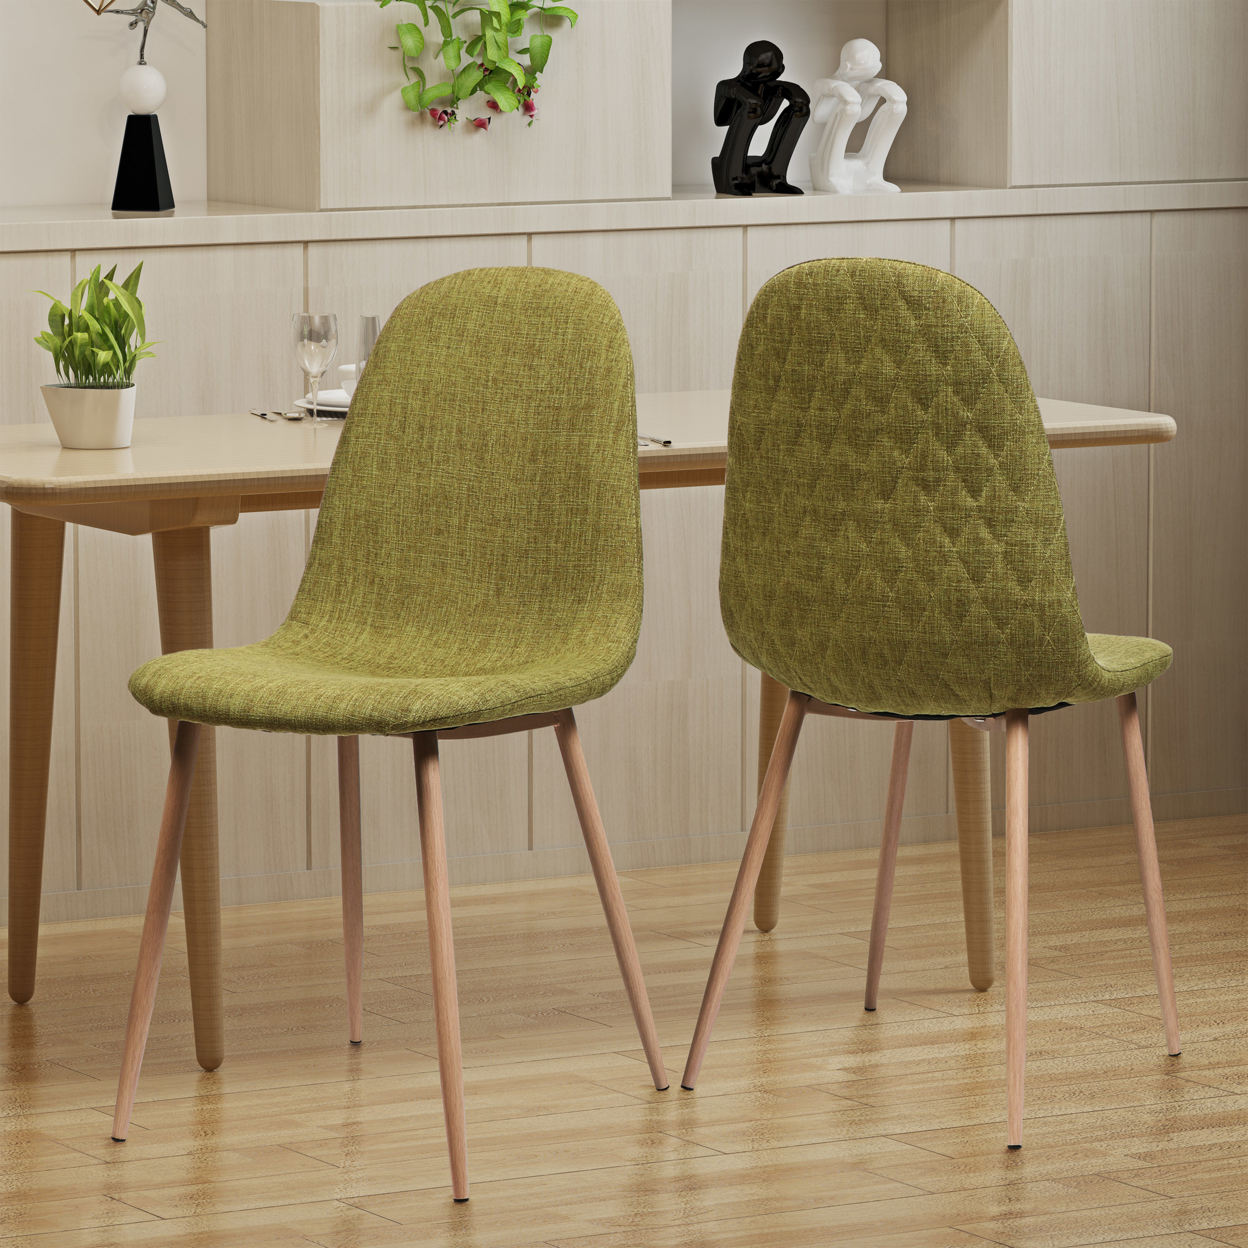 Camden Mid Century Fabric Dining Chairs With Wood Finished Legs - Set Of 2 - Green/Light Walnut